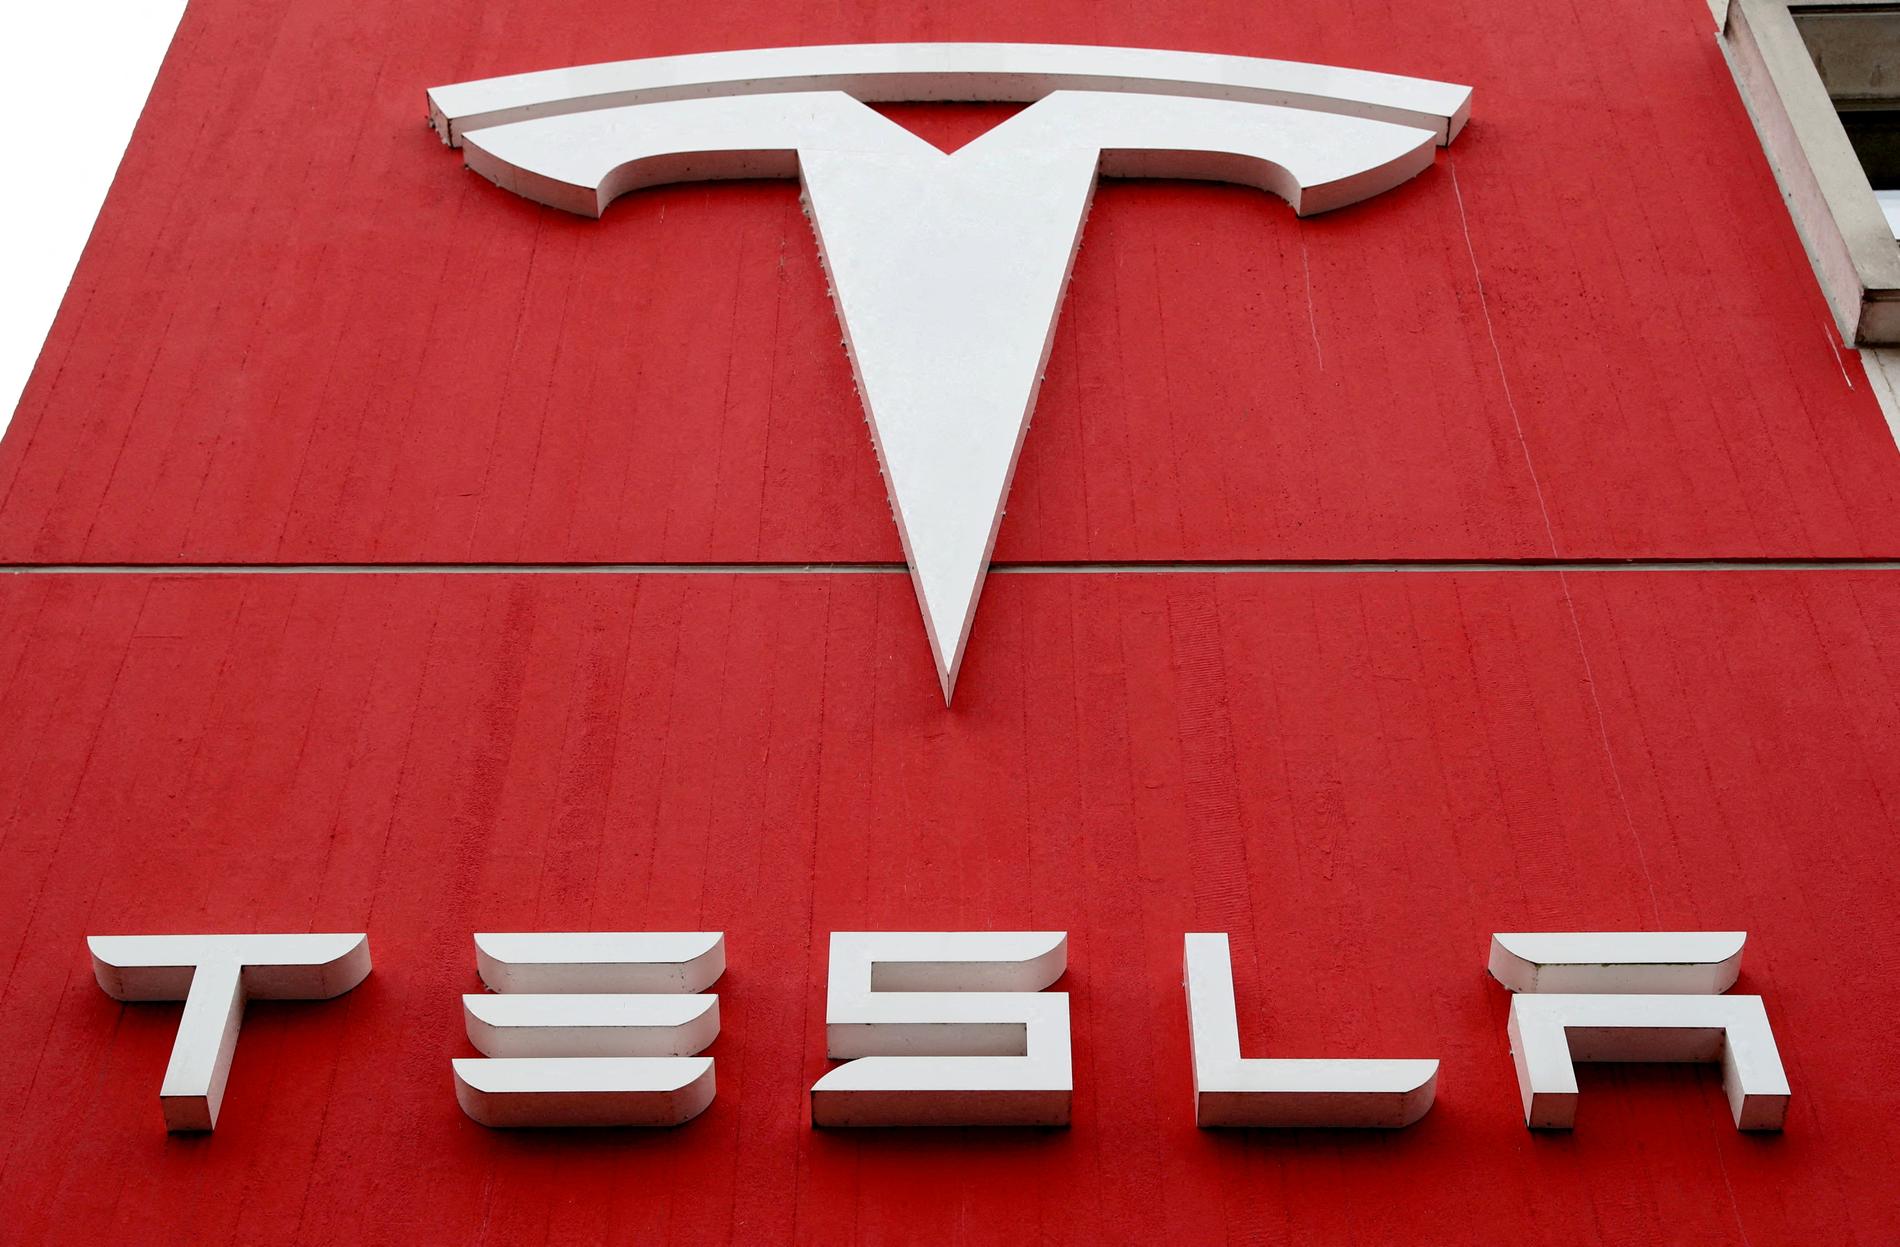 Tesla cuts prices in China – E24